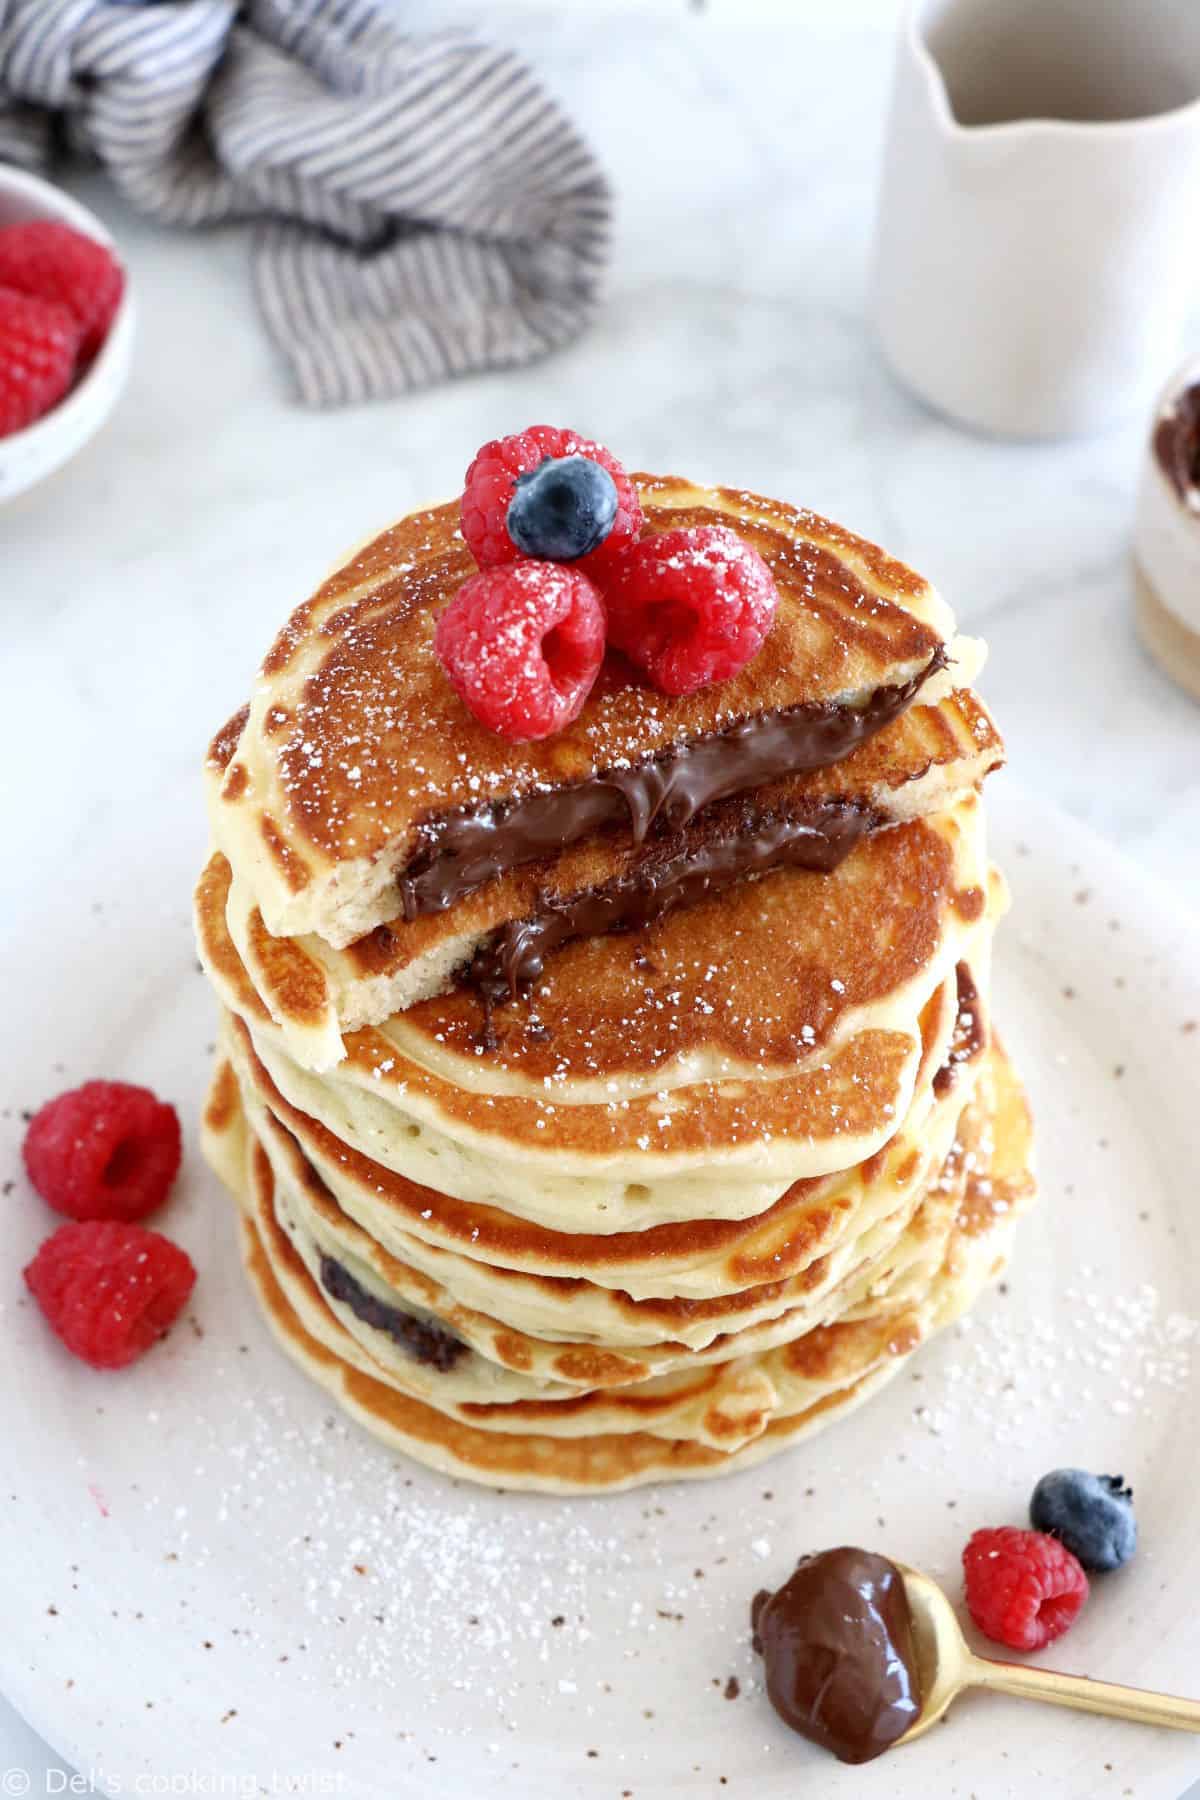 Nutella-stuffed pancakes are a dream come true! Imagine a stack of pillowy soft, fluffy pancakes, oozing with a warm chocolate center.